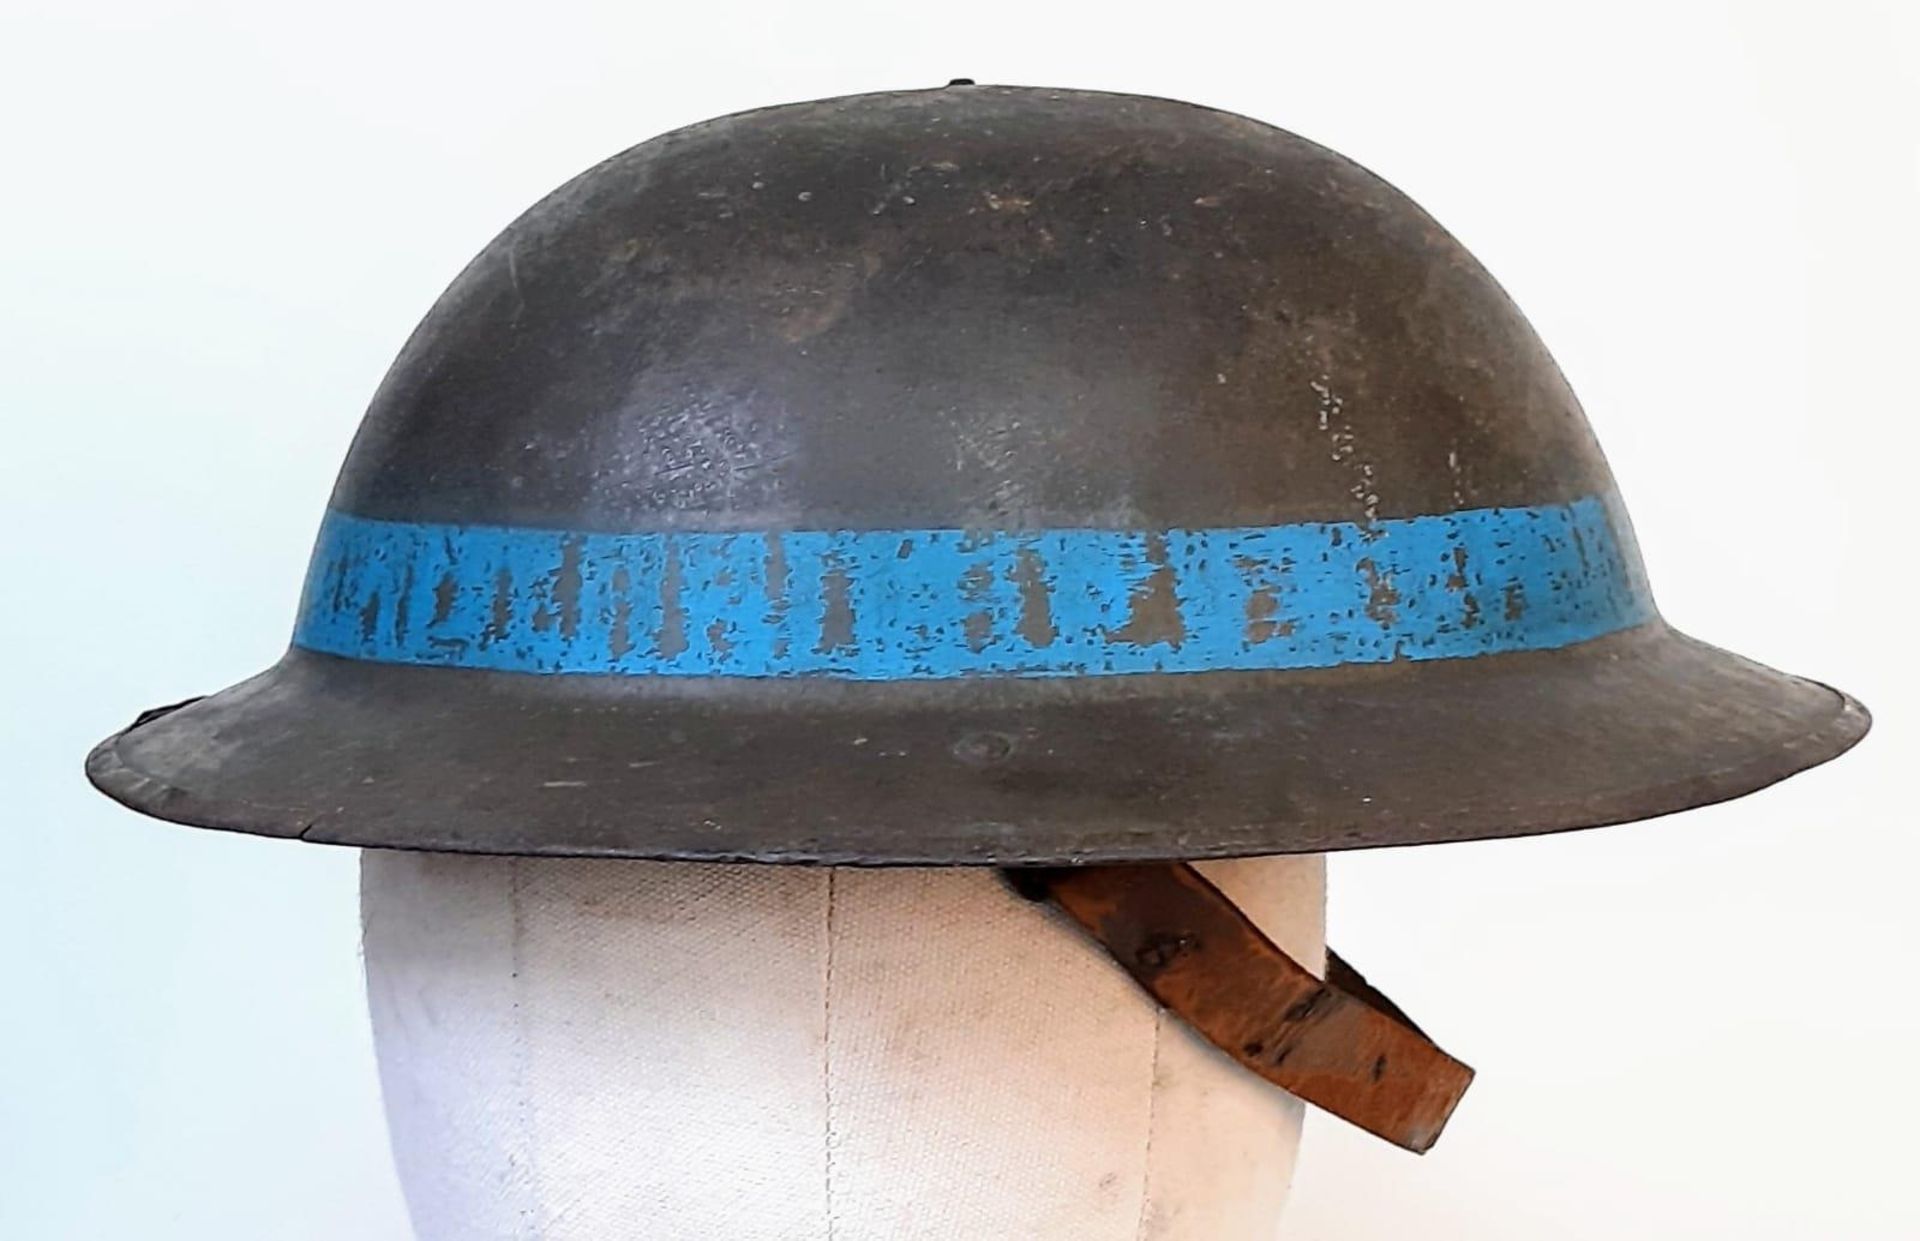 WW1 British Brodie Helmet with Blue Band for the 1st Bn East Yorks circa 1918. Lots of the - Bild 4 aus 7